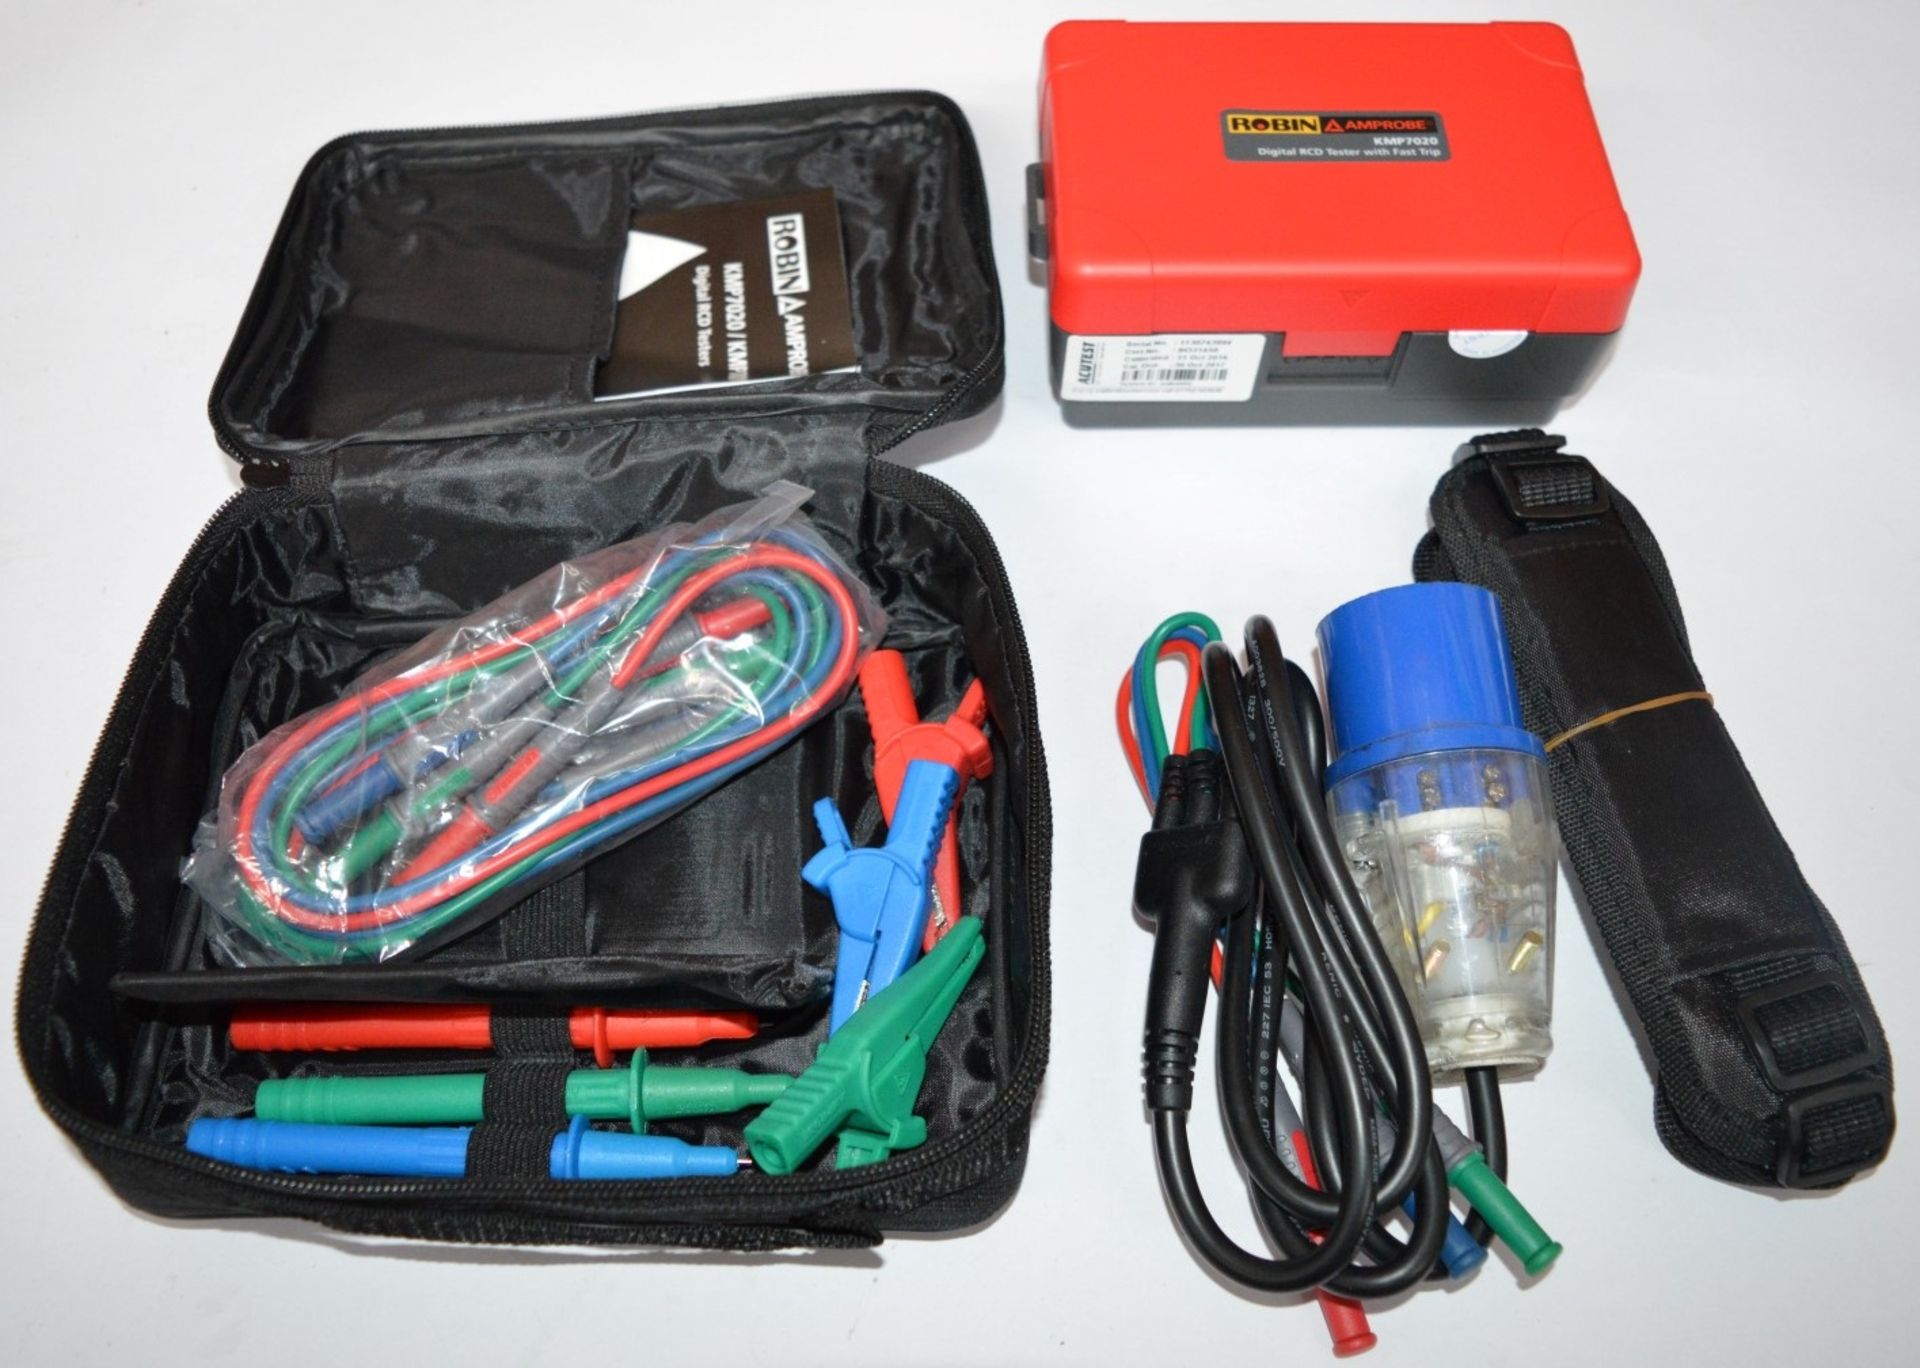 1 x Robin Amprobe Digital RCD Tester Wth Fast Trip - Model KMP7020 - Boxed With All Accessories - - Image 10 of 12